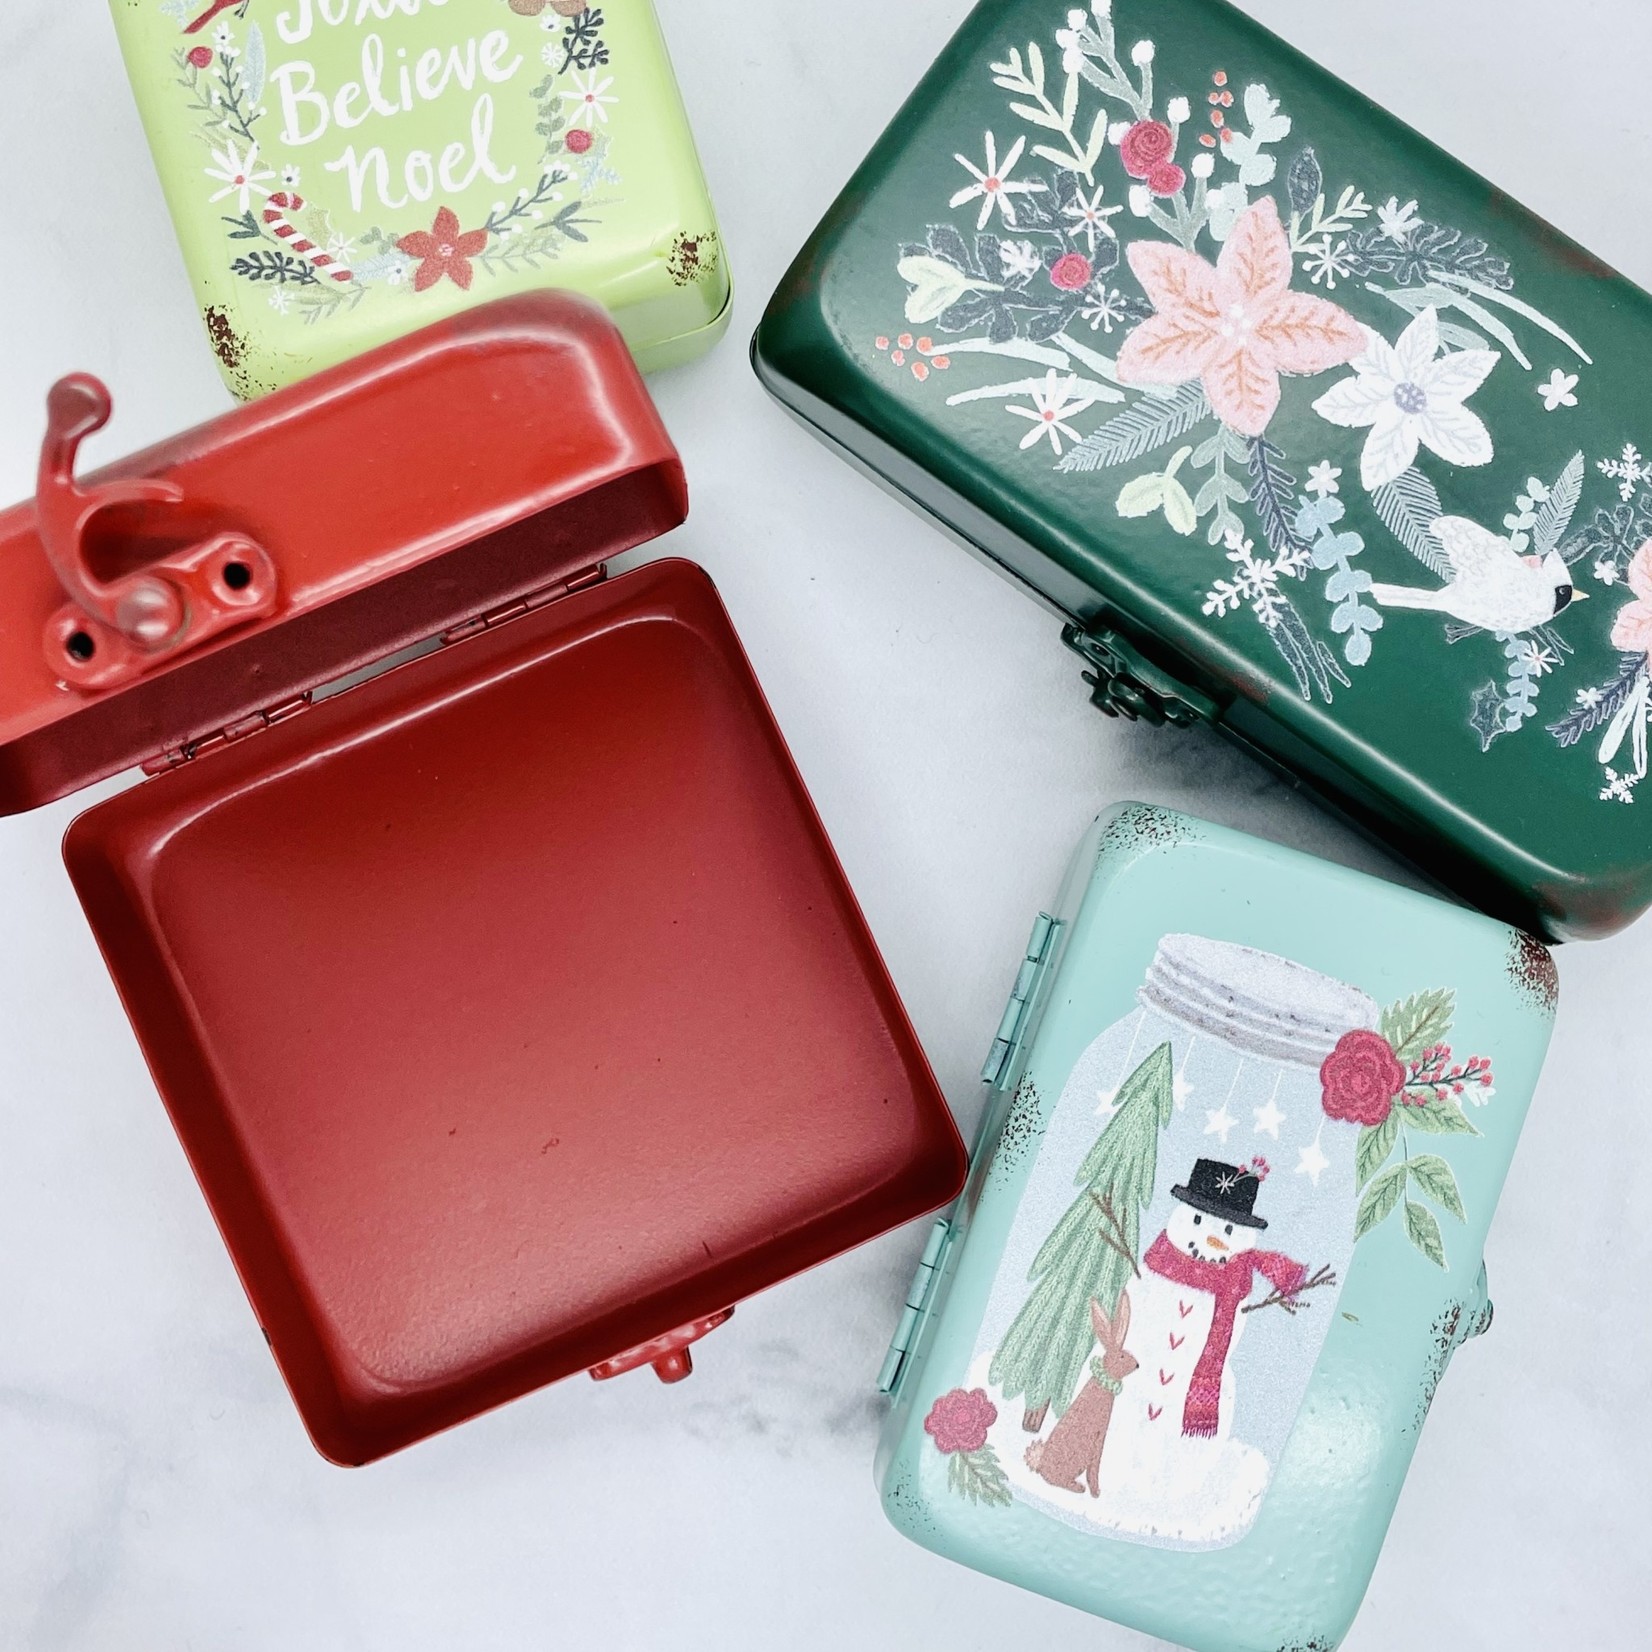 Decorative Metal Box w/ Holiday Images